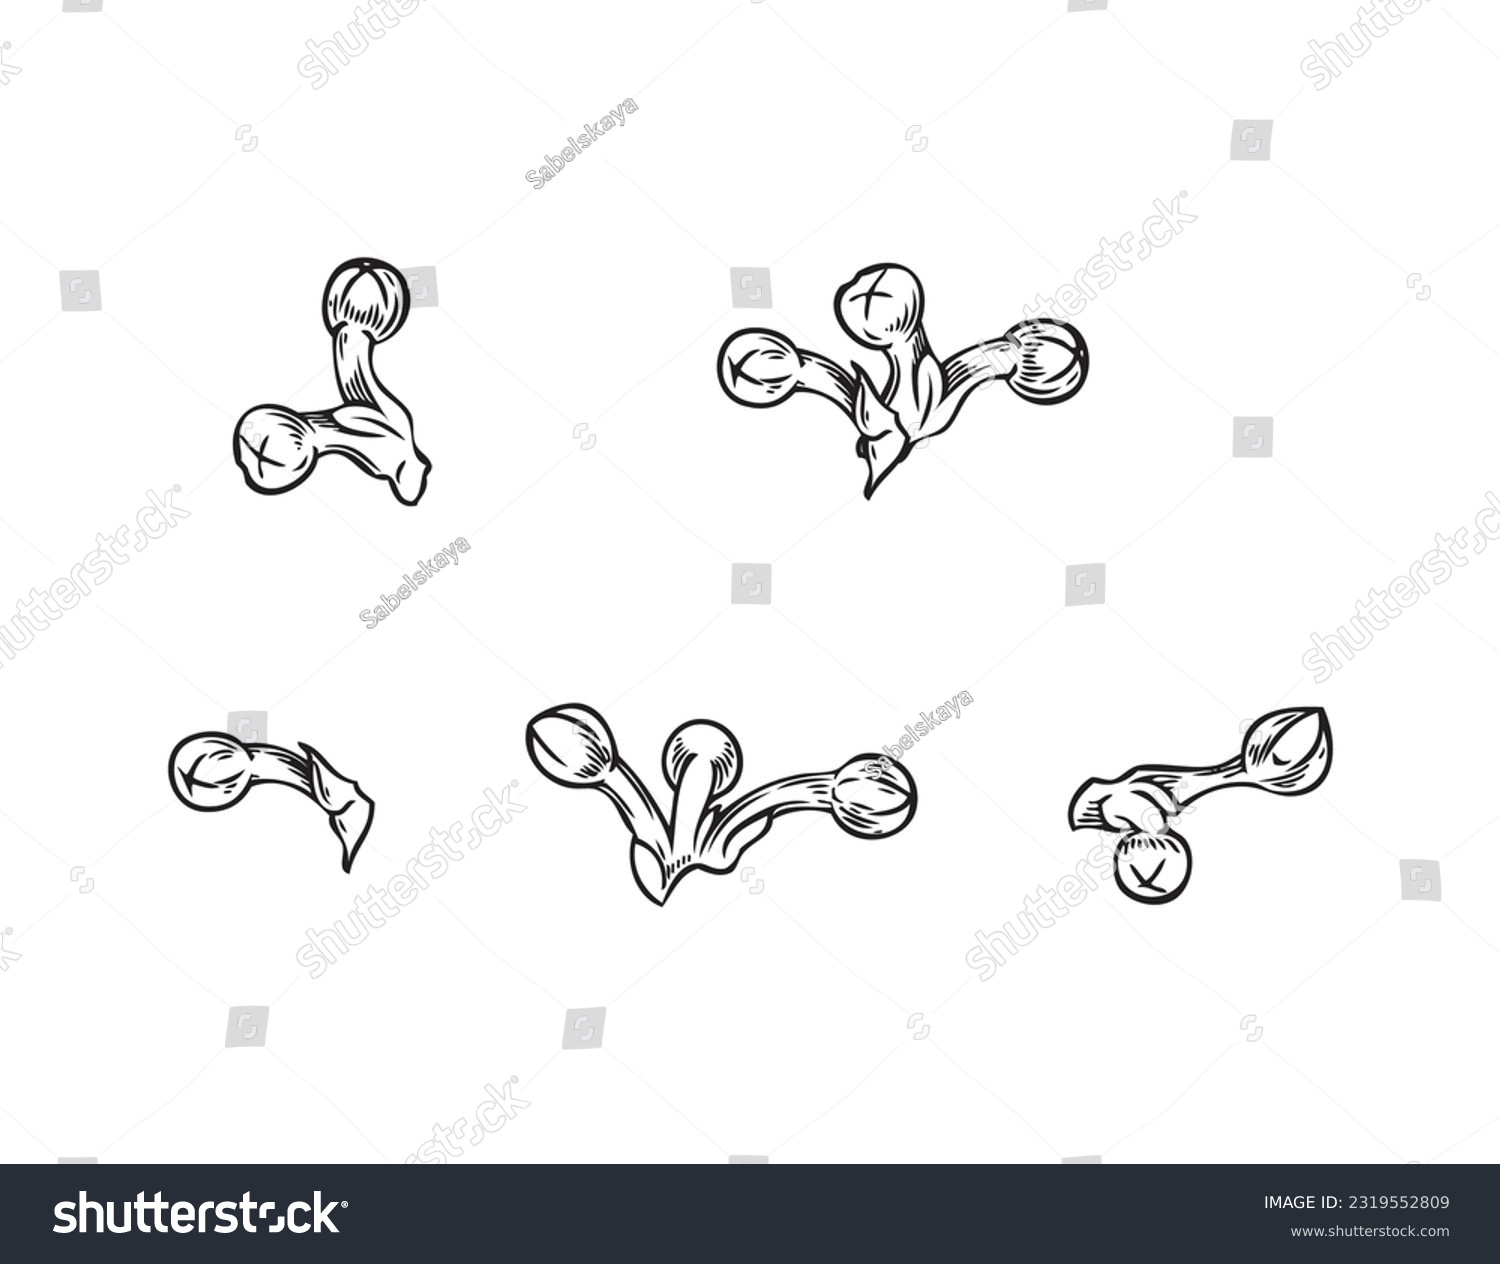 SVG of Bay leaf seeds growing, hand drawn sketch vector illustration isolated on white background. Set of monochrome bay laurel branches growing new leaves. Gardening concept. svg